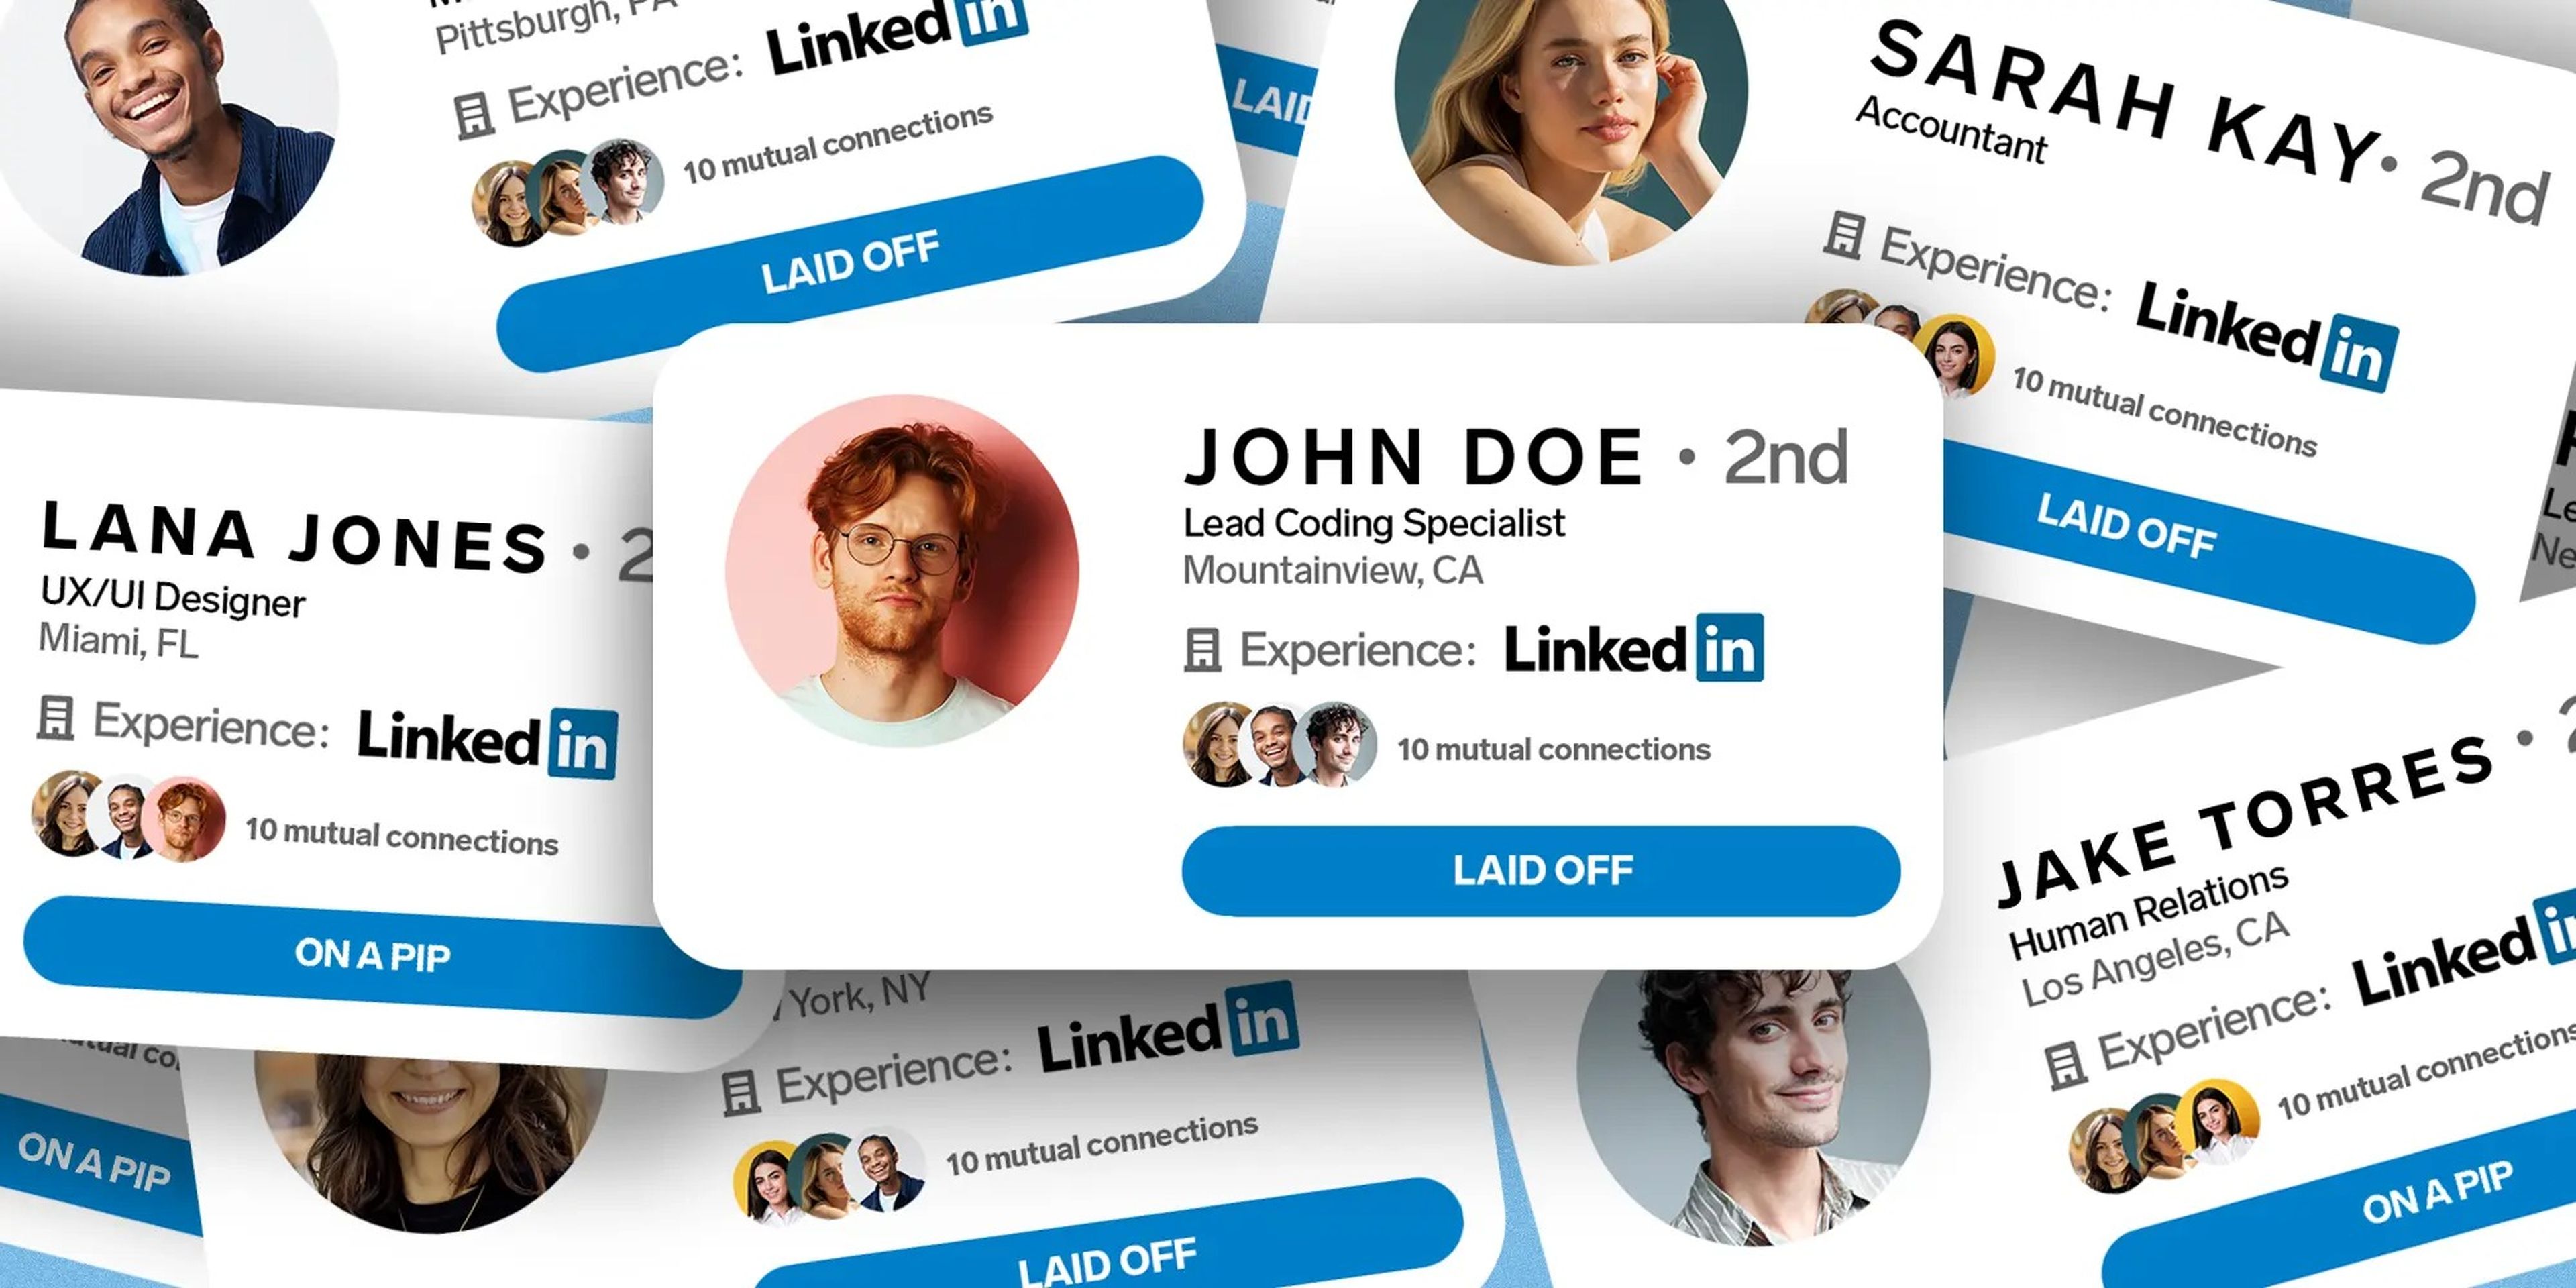 A chaotic pile of linkedin profiles with "laid off" and "on a PIP" labeled on them